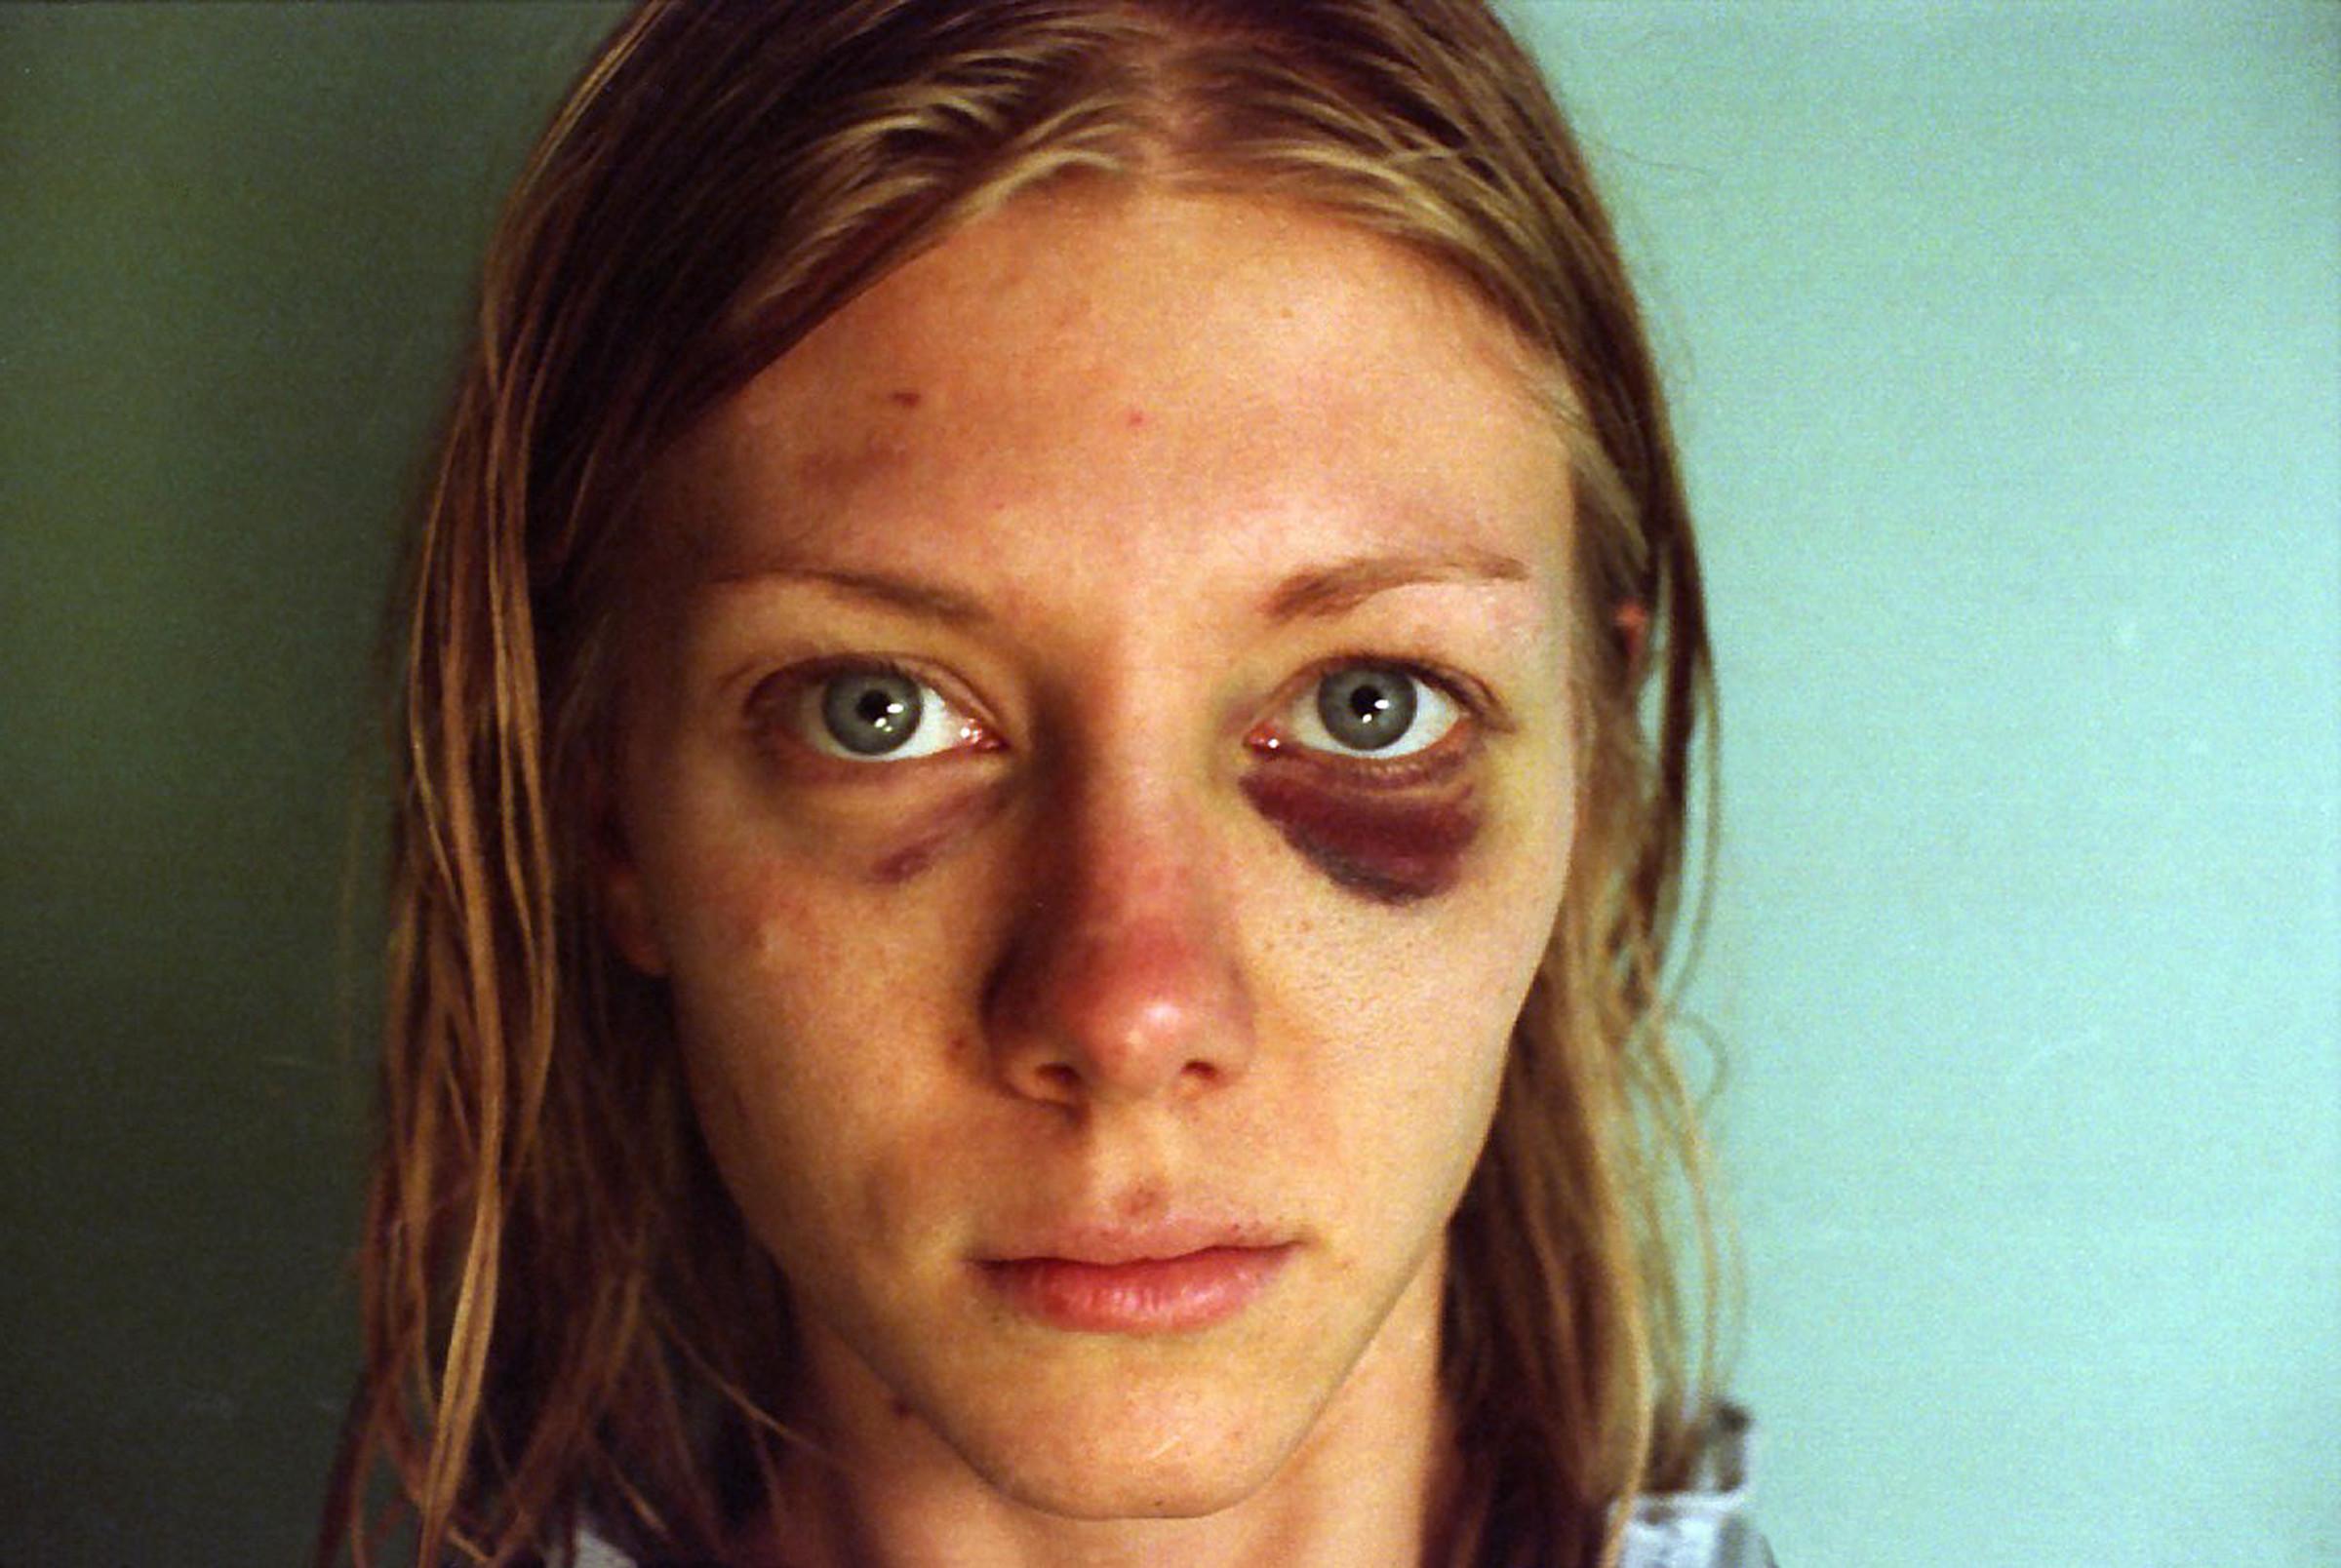 A light-skinned person with stringy blond hair, gray eyes, and a prominently bruised left eye stares directly at the viewer.